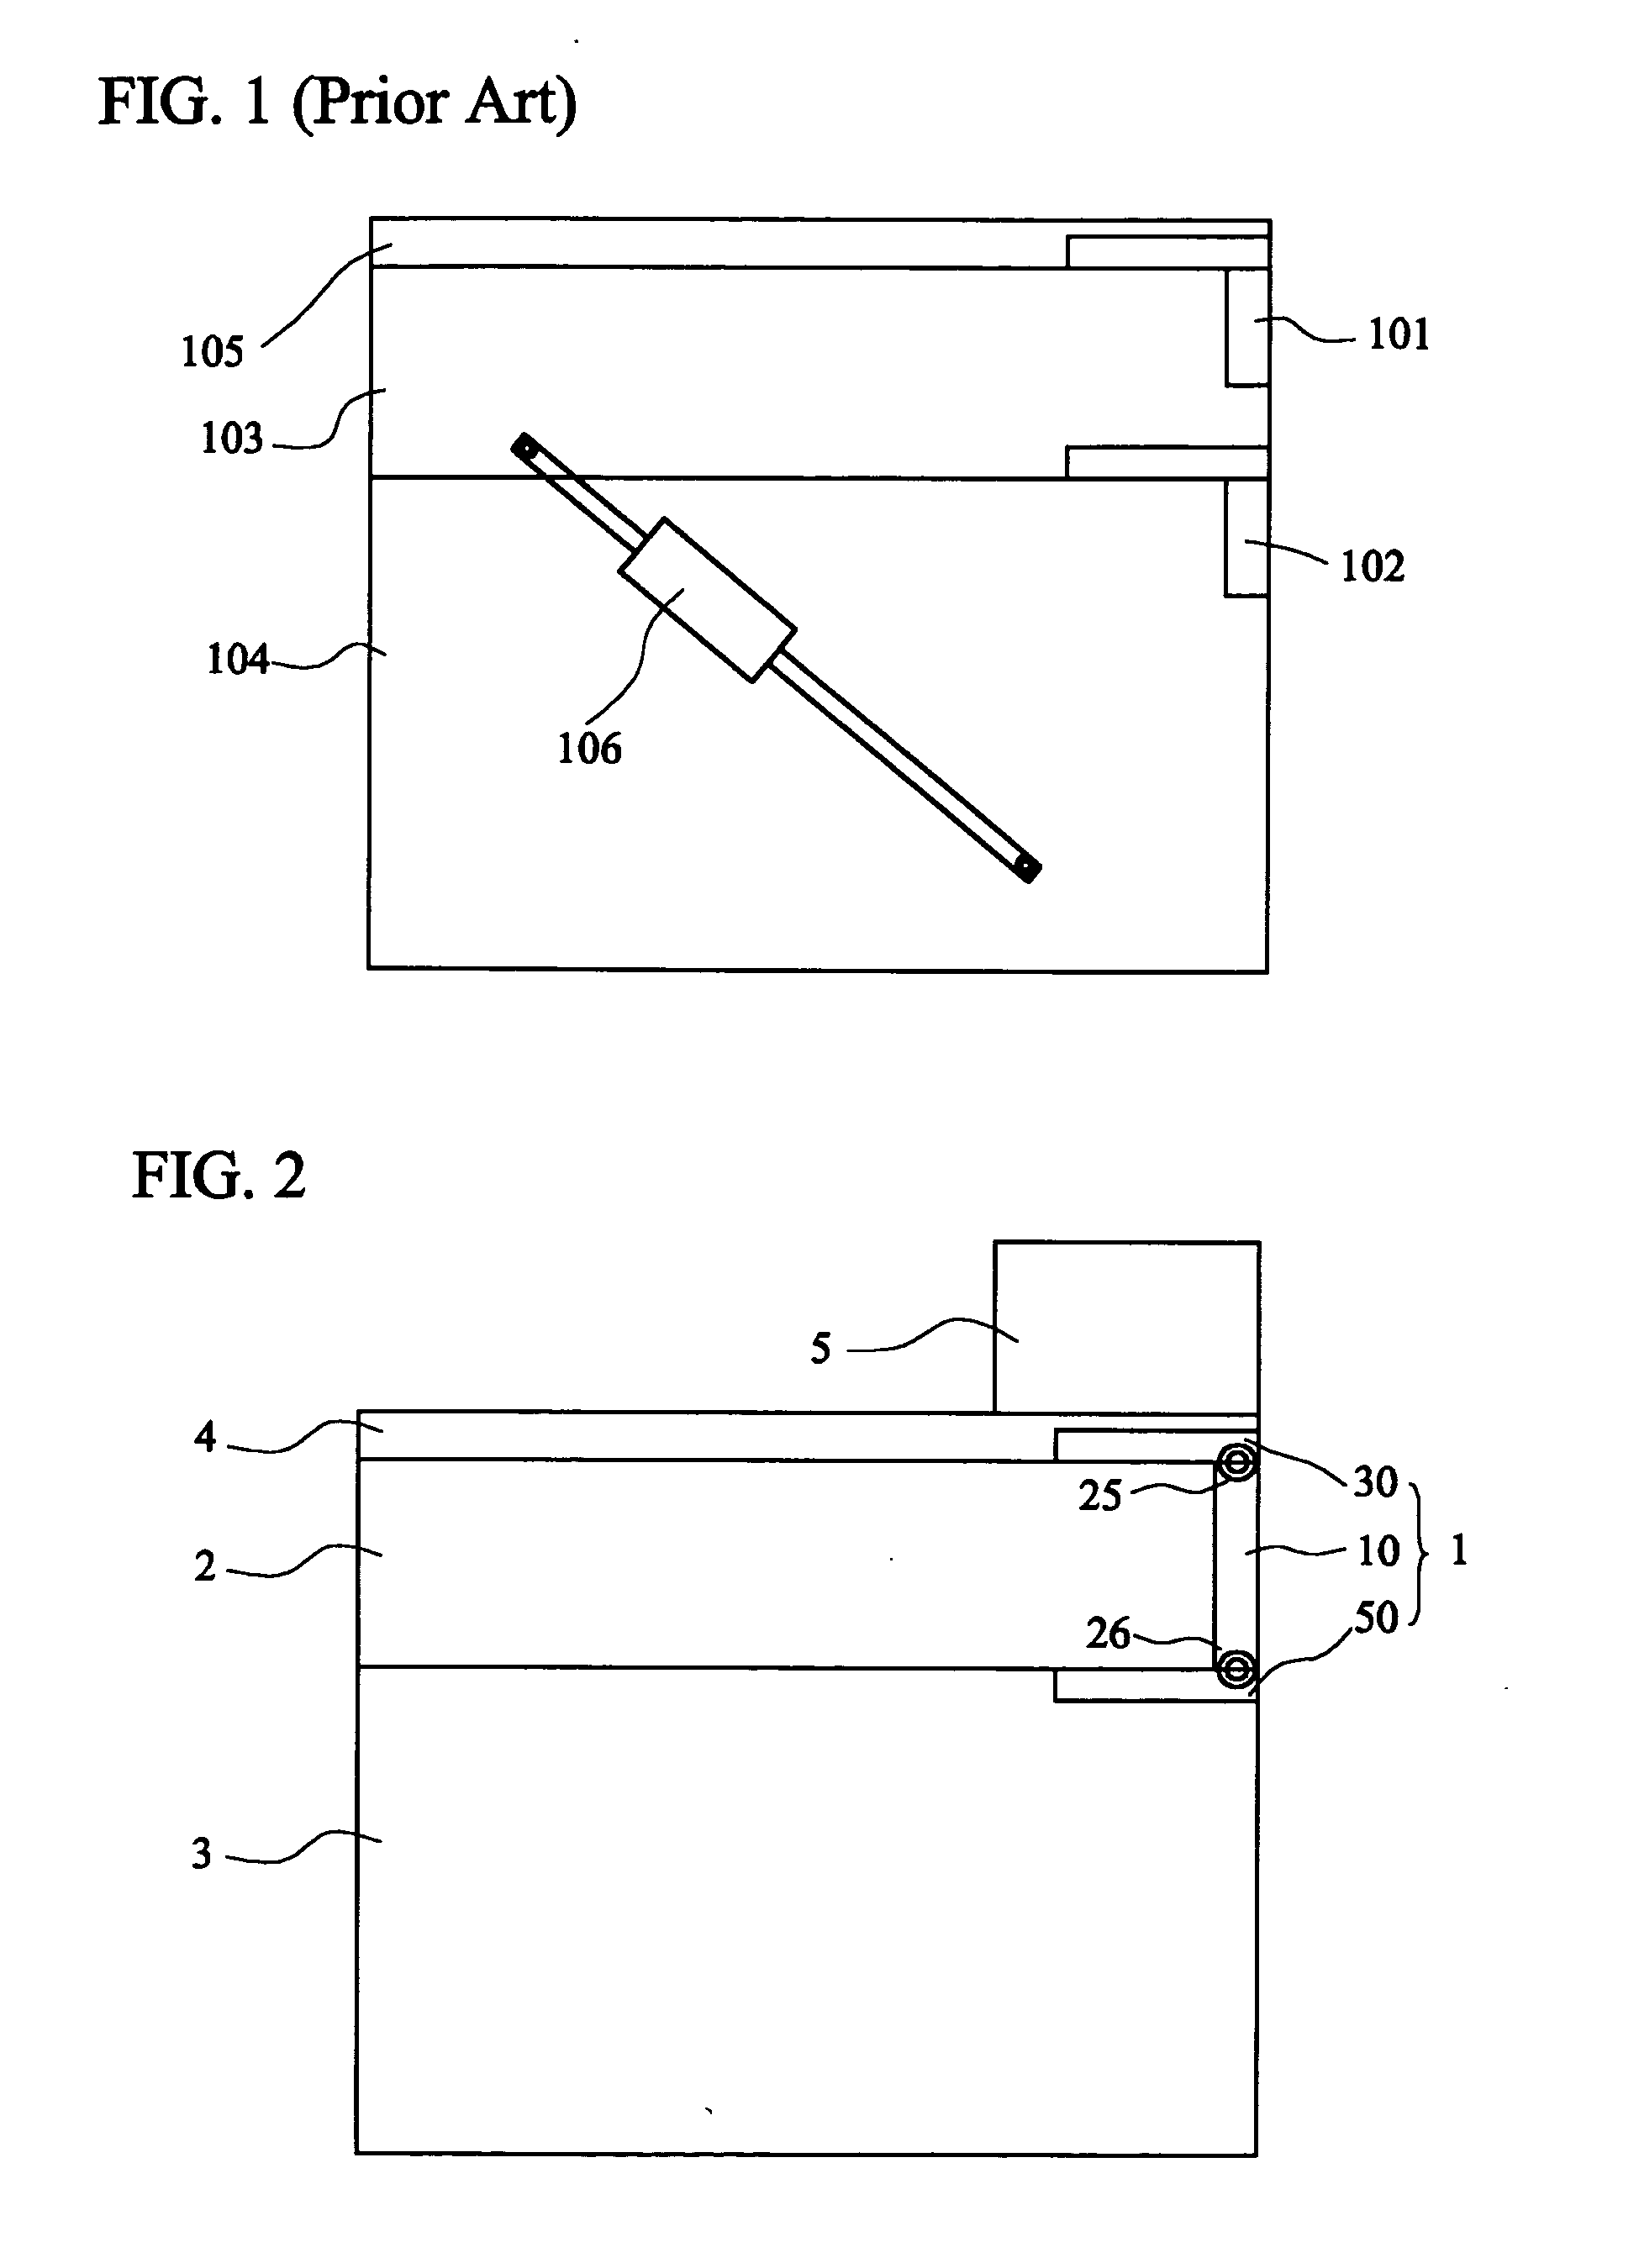 Duplex hinge device and a multi-function peripheral using the same